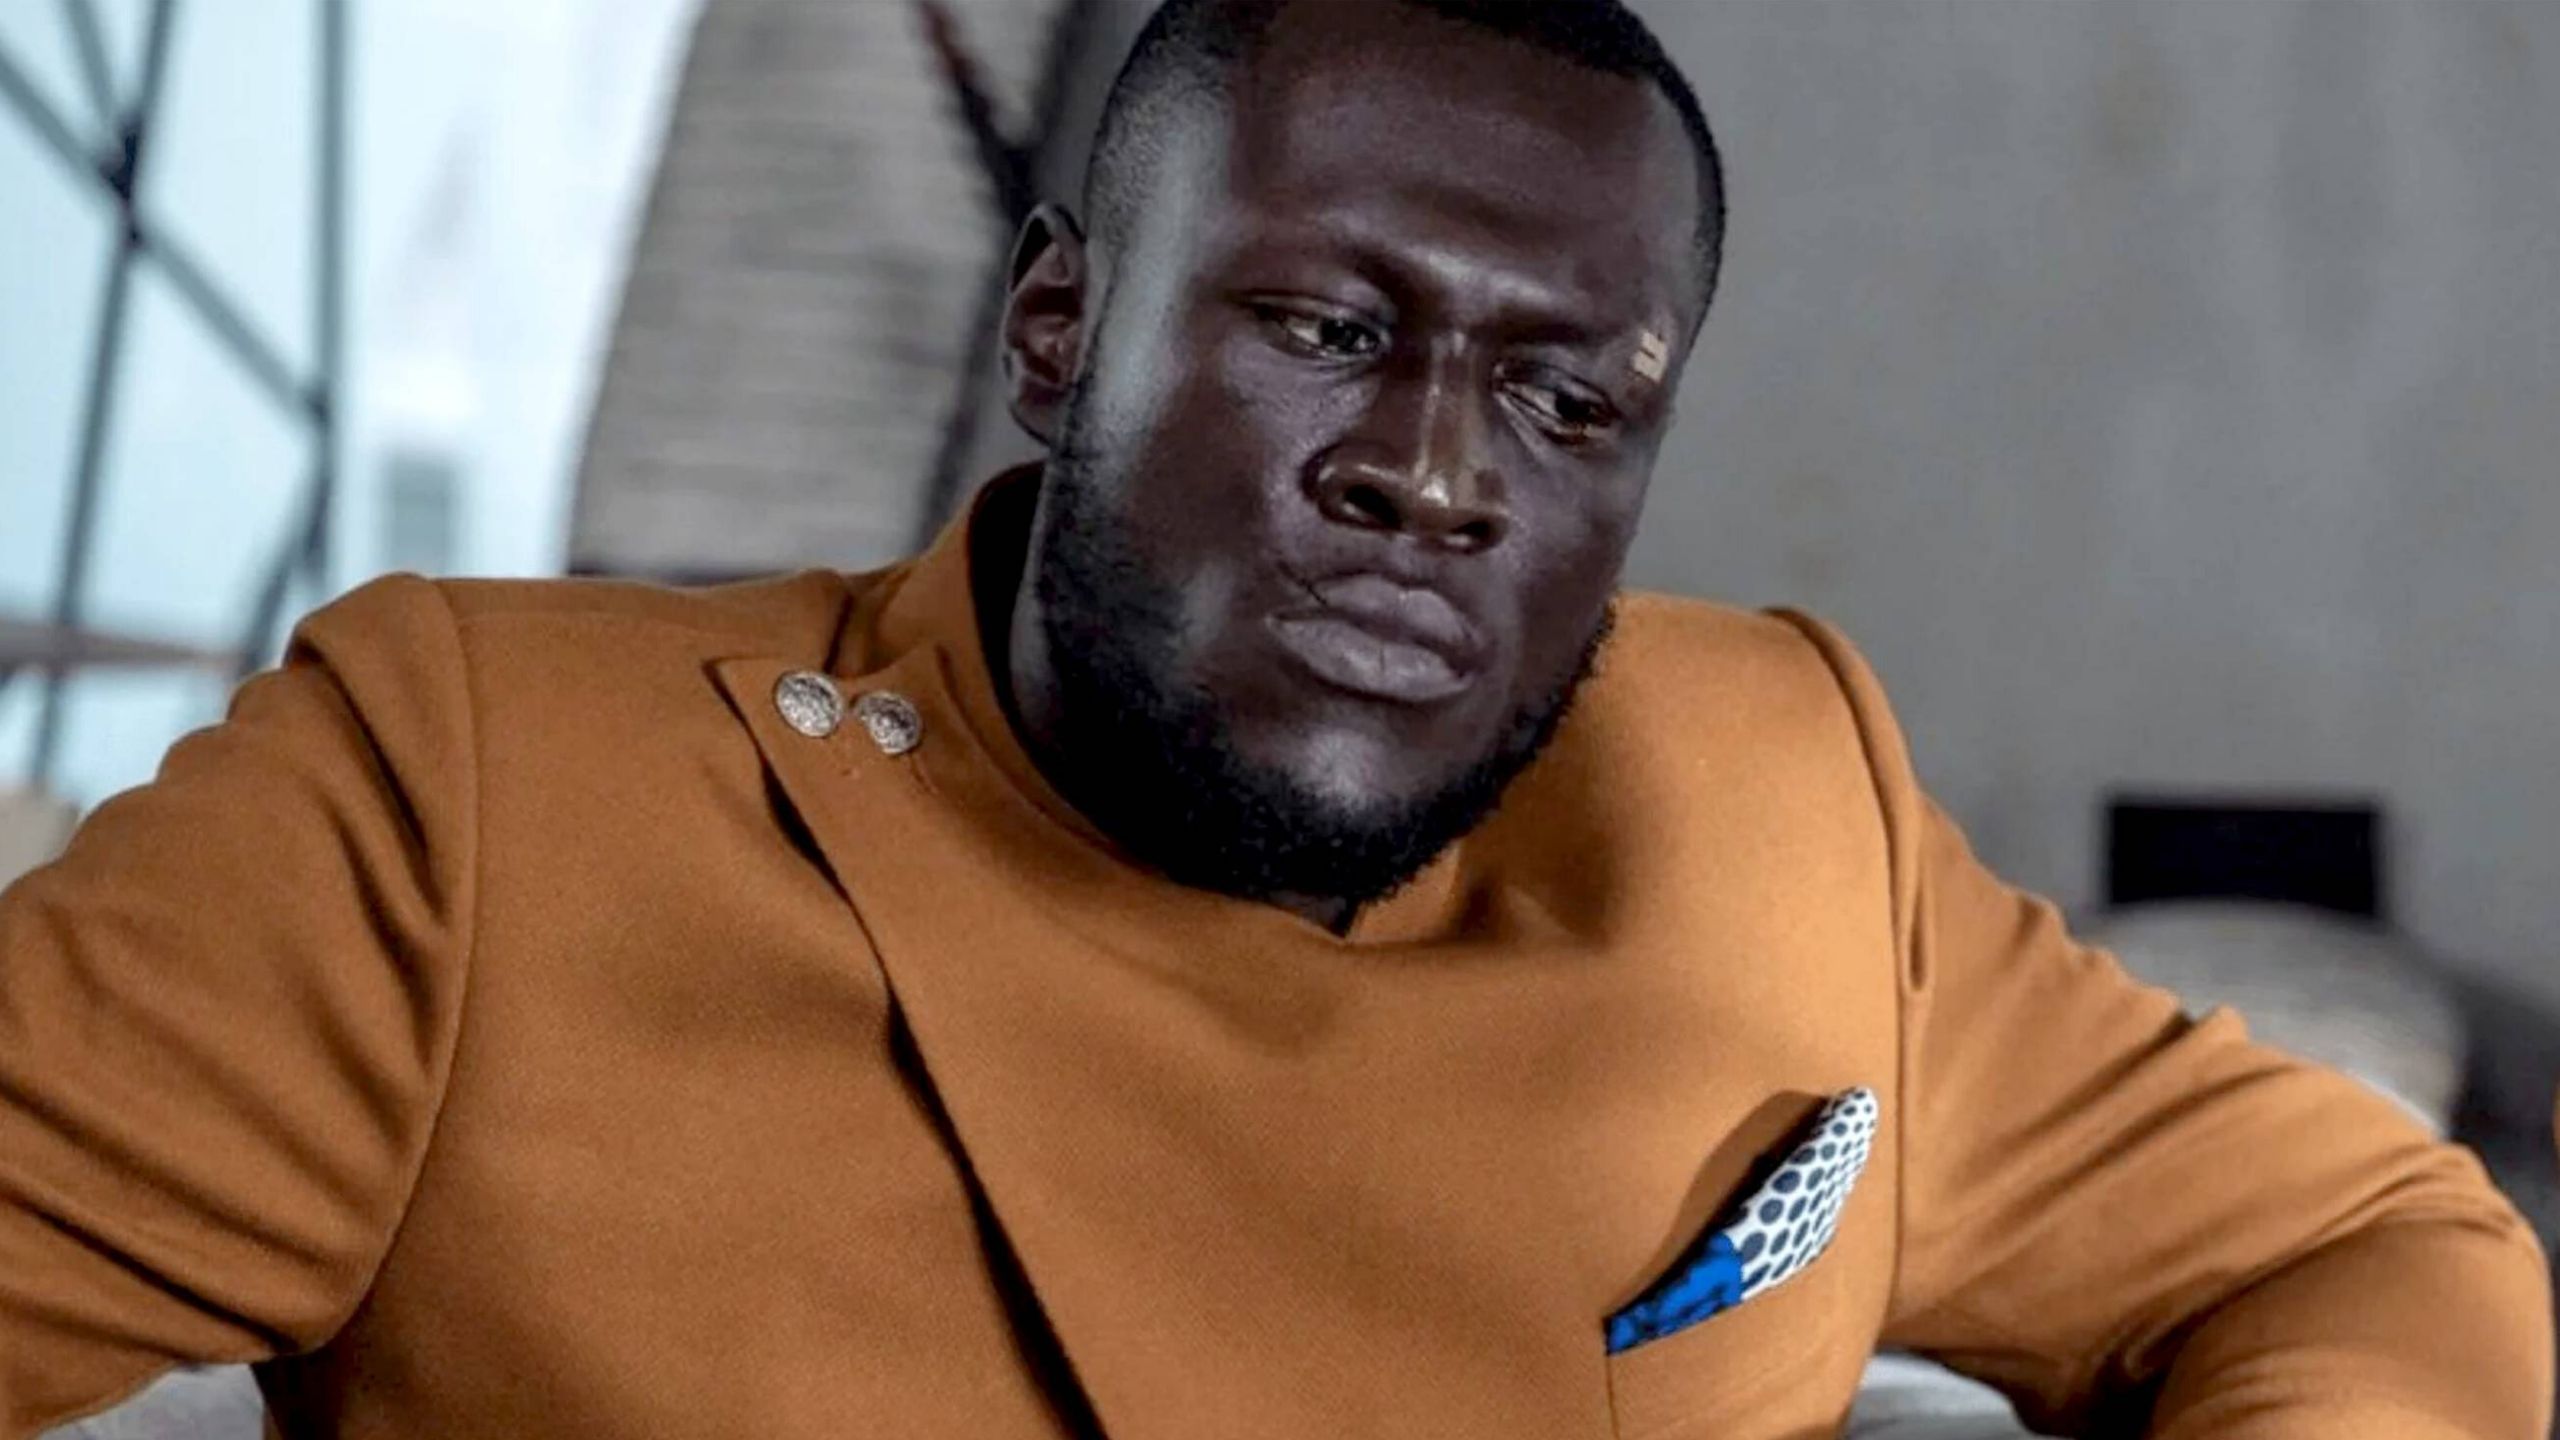 Stormzy in BBC's Noughts+Crosses, due to come out in 2020